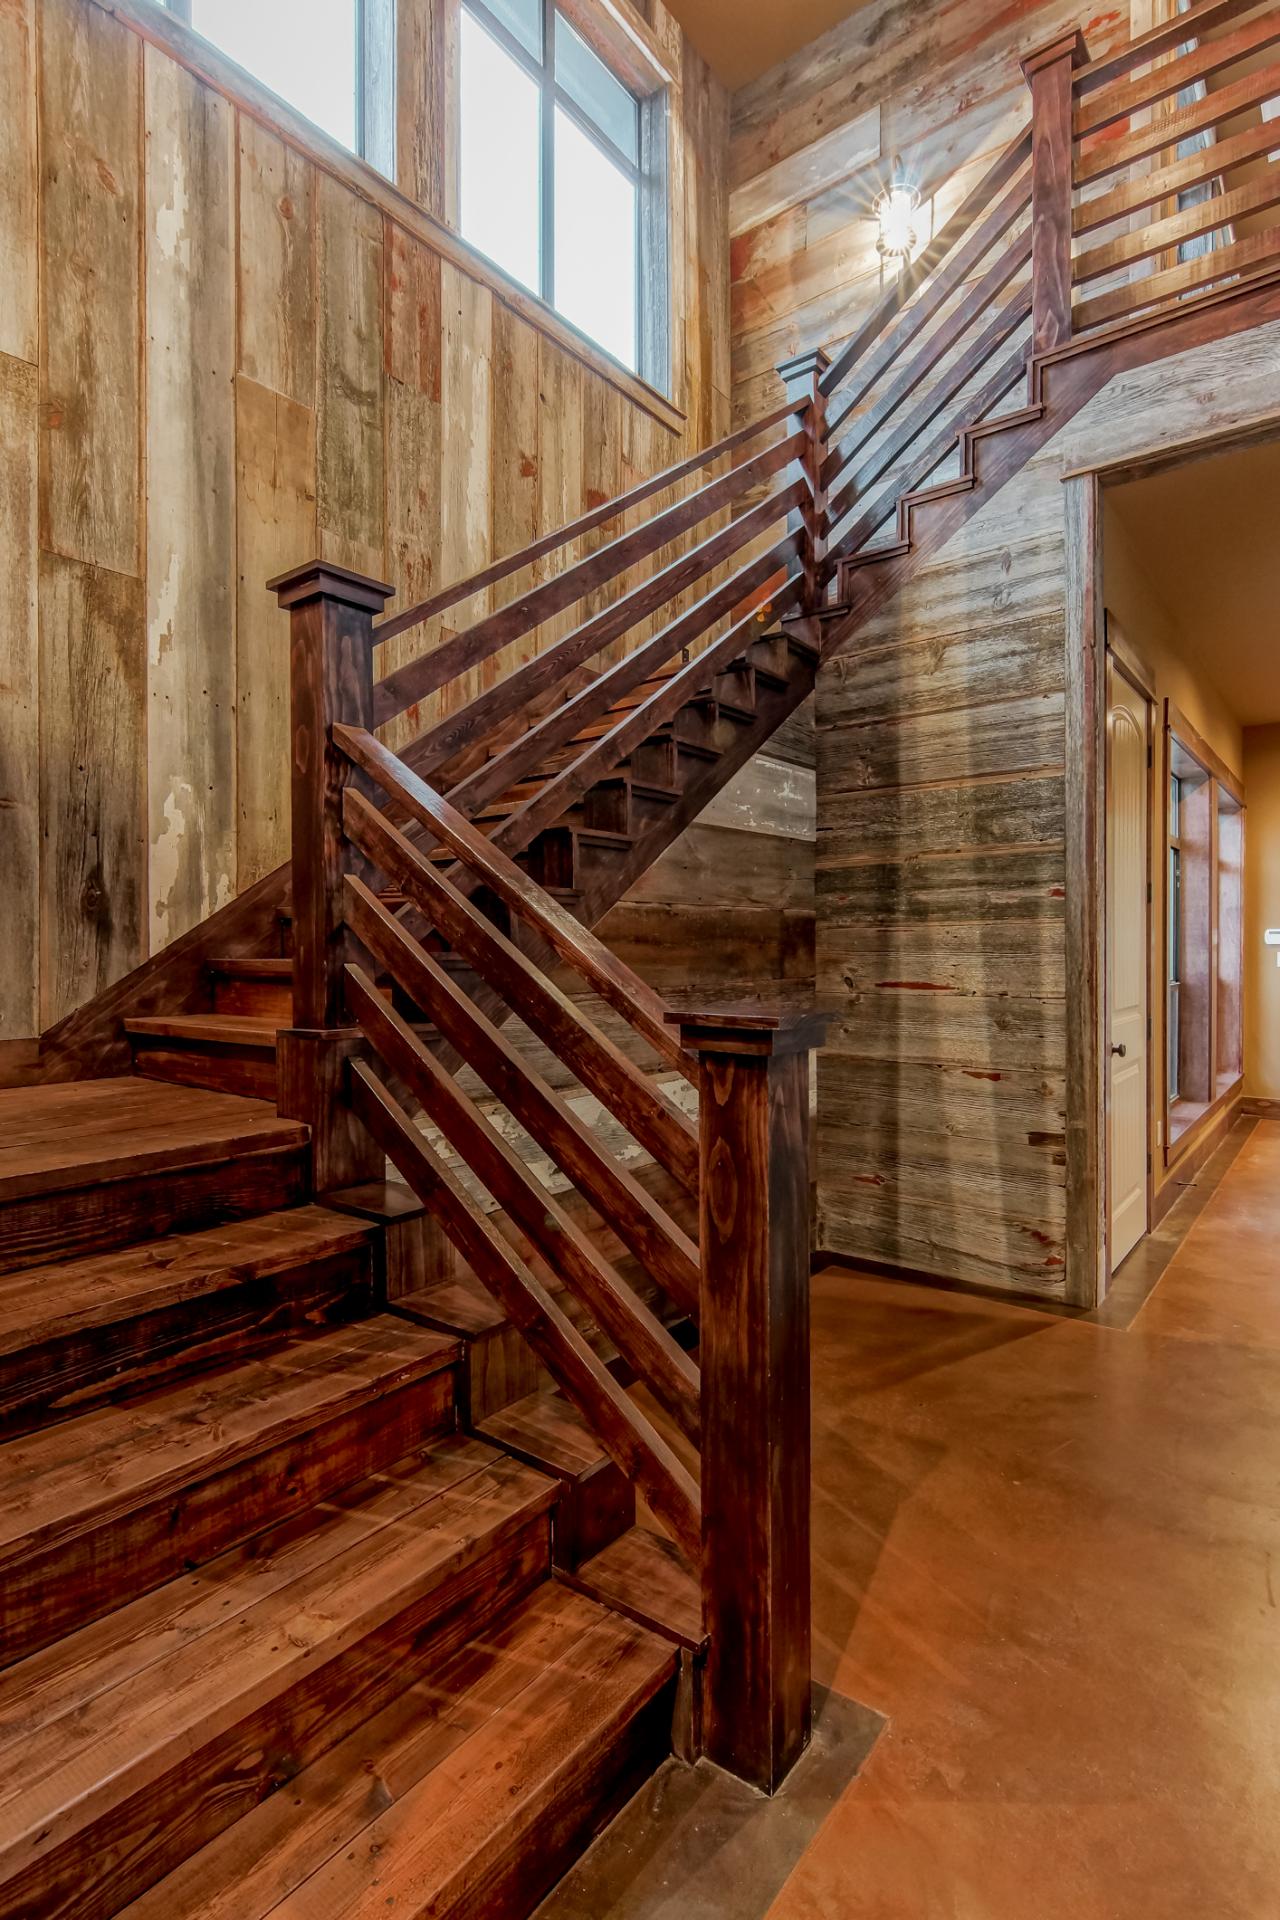 Rustic Stairs With Natural Wood Walls and Stained Wood Steps